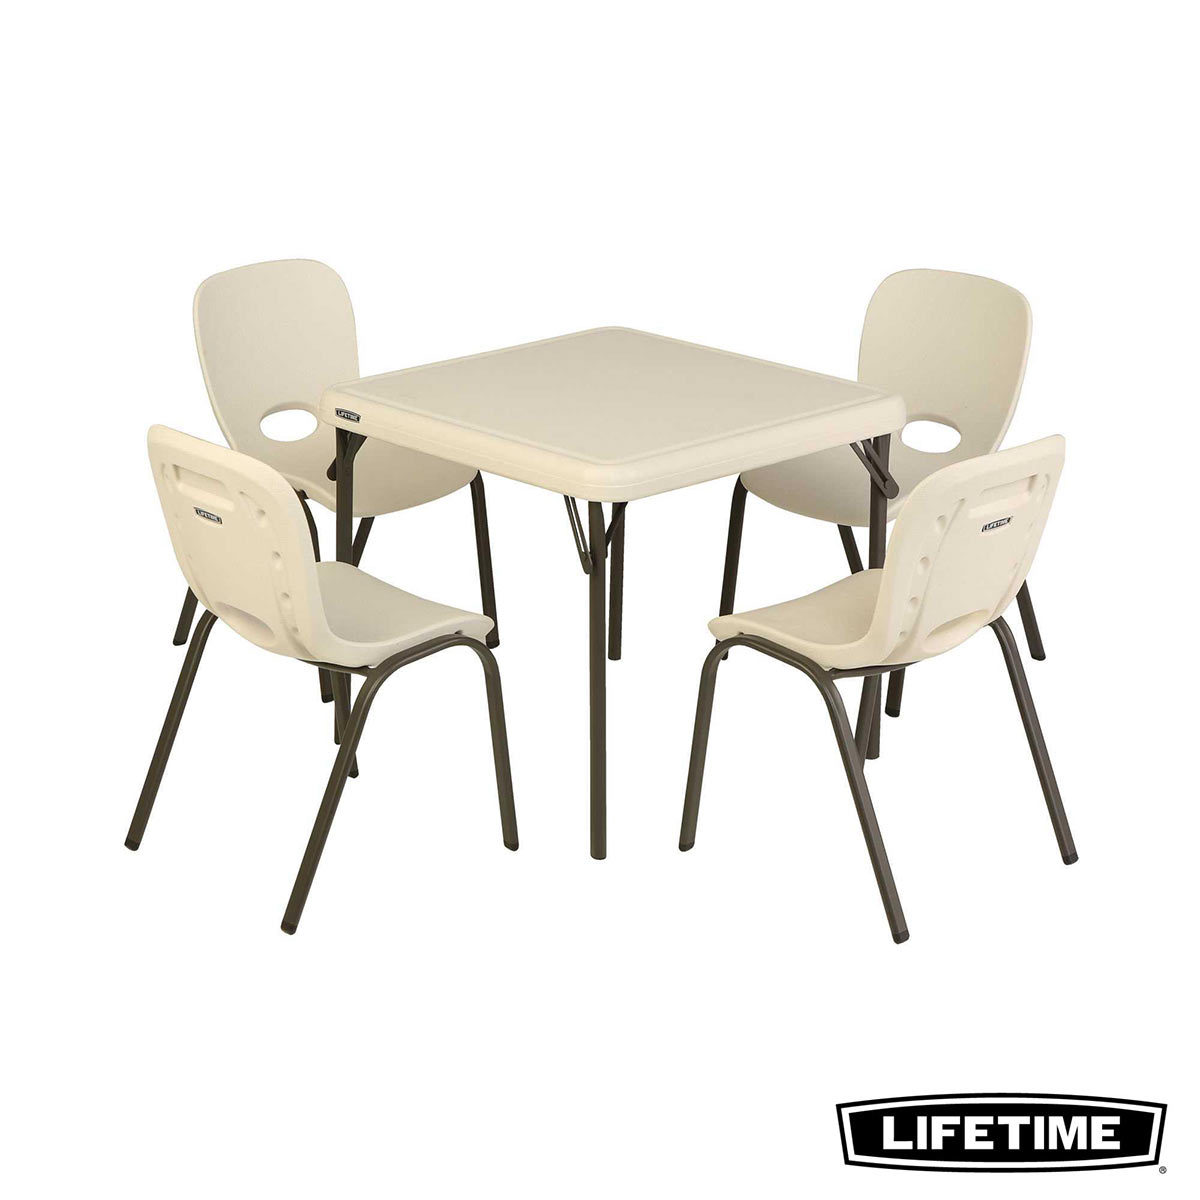 Lifetime Children S Table With 4 Almond Stacking Chairs Costco Uk